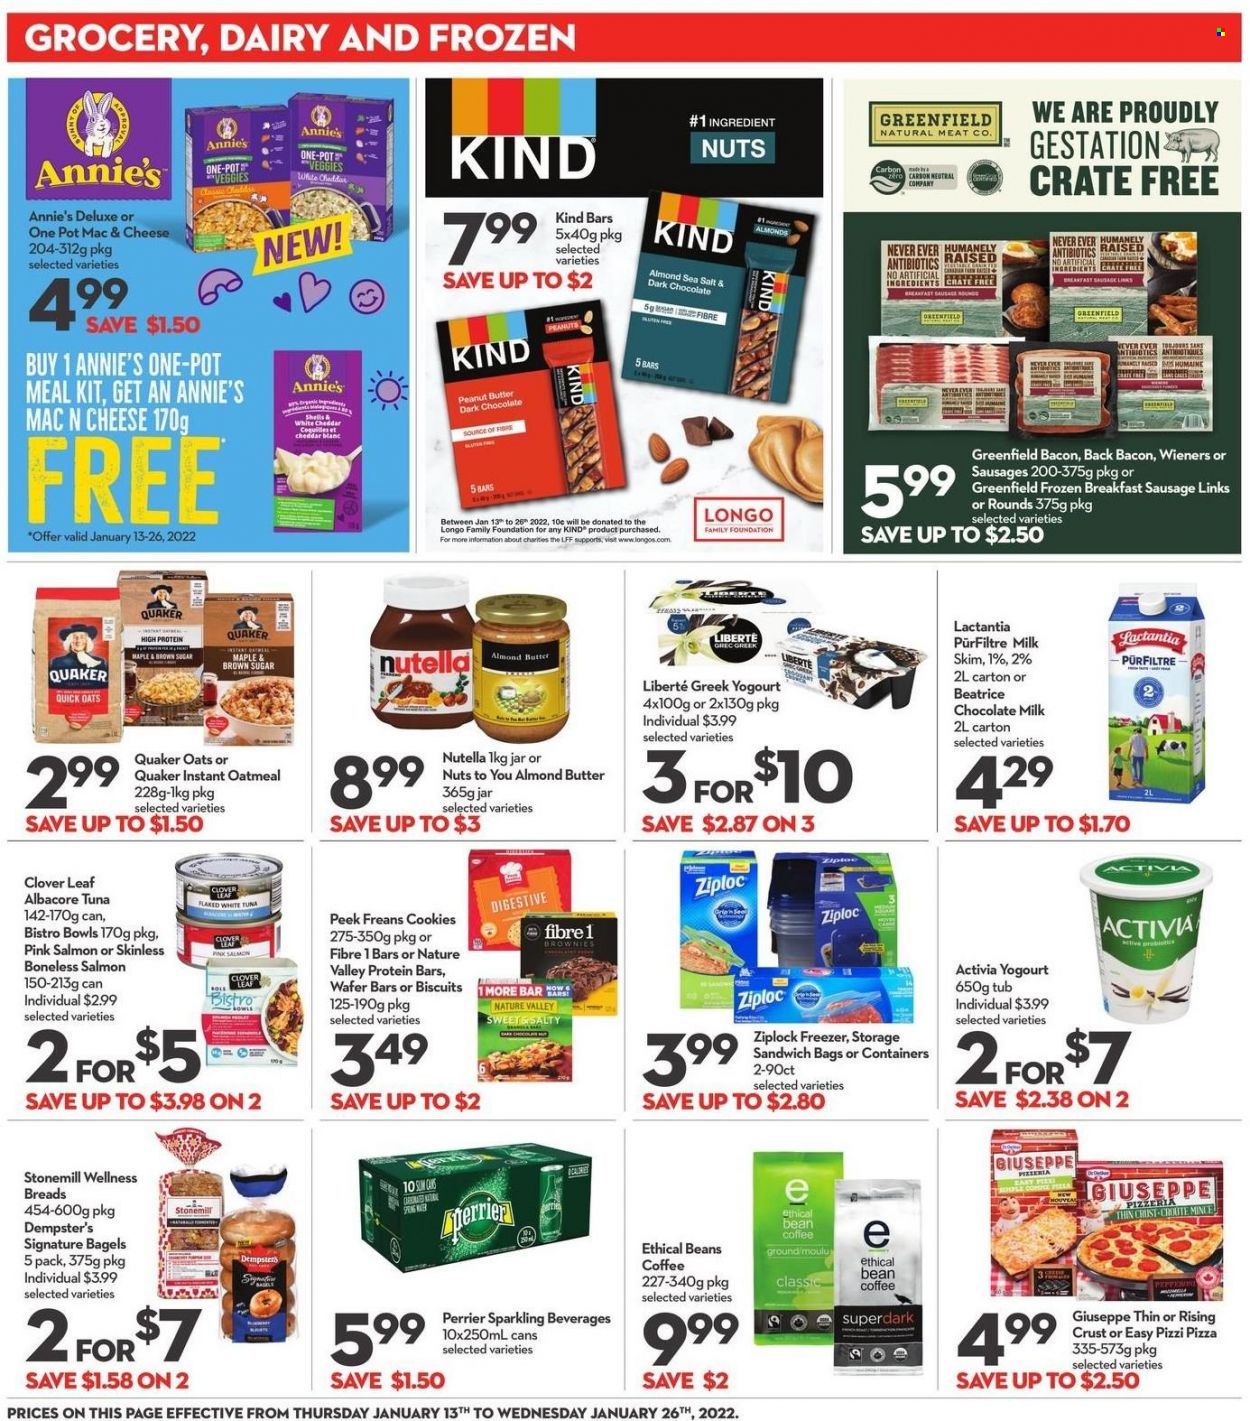 thumbnail - Longo's Flyer - January 13, 2022 - January 26, 2022 - Sales products - bagels, brownies, salmon, tuna, pizza, Quaker, Annie's, bacon, sausage, cheddar, Clover, Activia, milk, almond butter, cookies, milk chocolate, wafers, chocolate, biscuit, dark chocolate, Digestive, oatmeal, oats, protein bar, Nature Valley, peanut butter, Perrier, coffee, Ziploc, Nutella. Page 11.